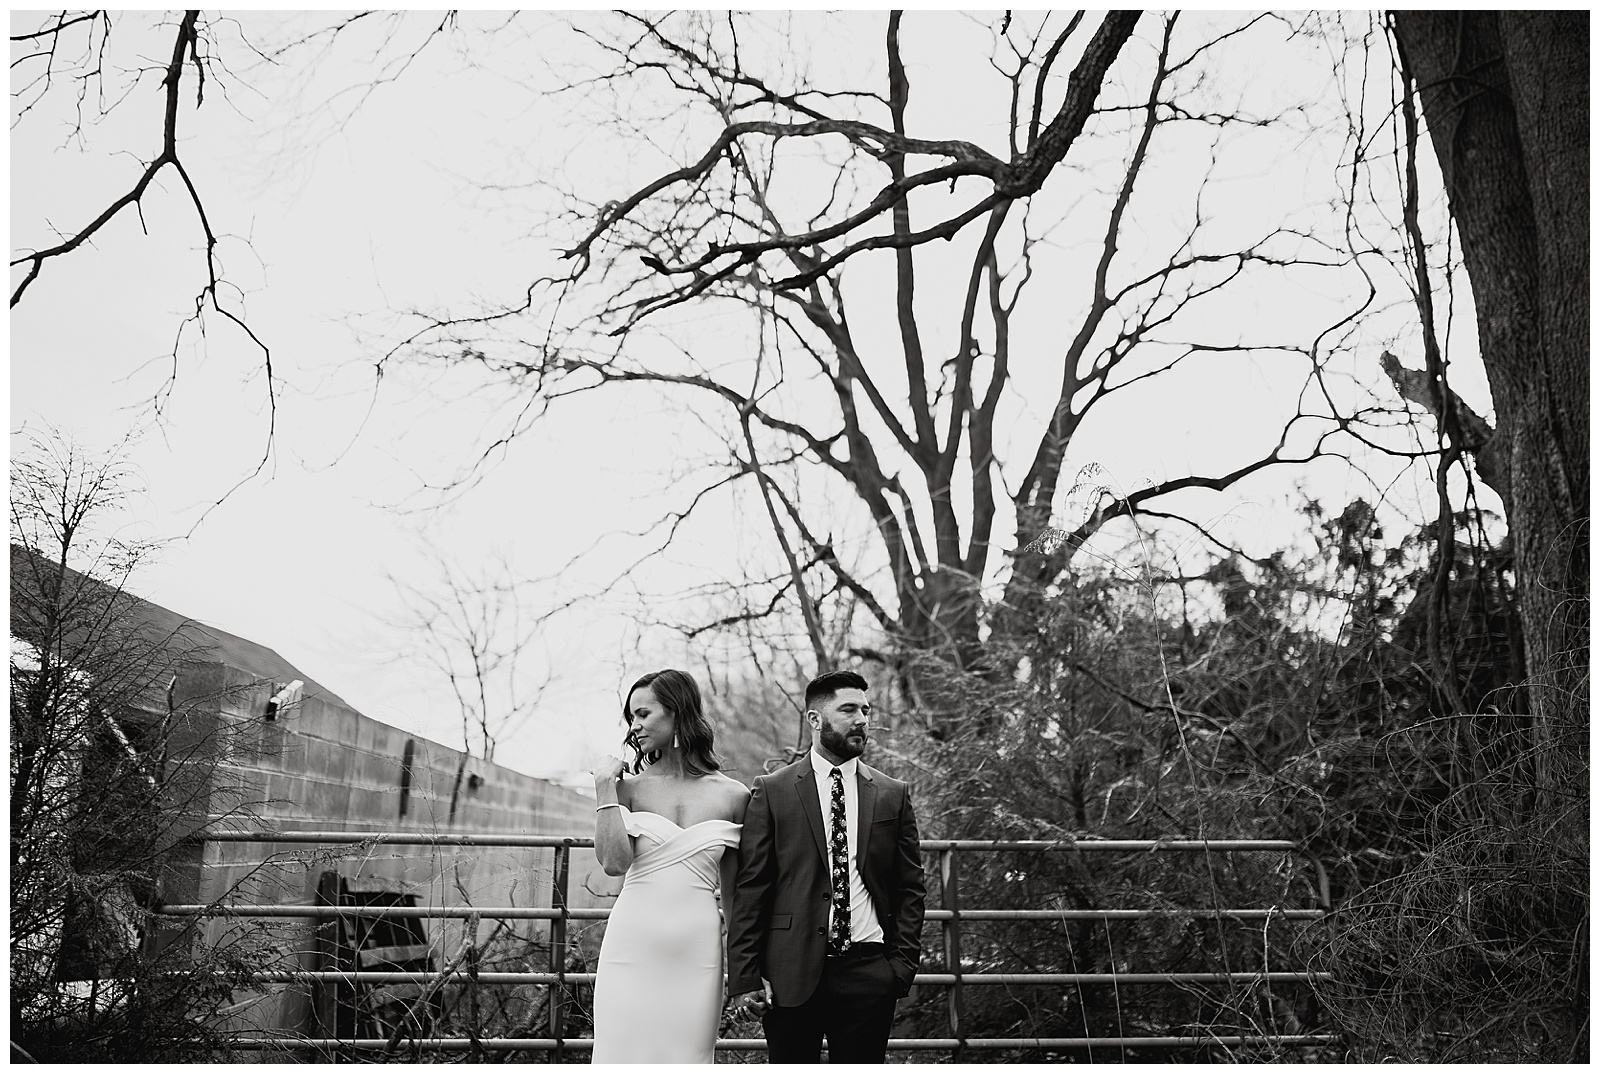 Intimate couples portraits for their wedding day